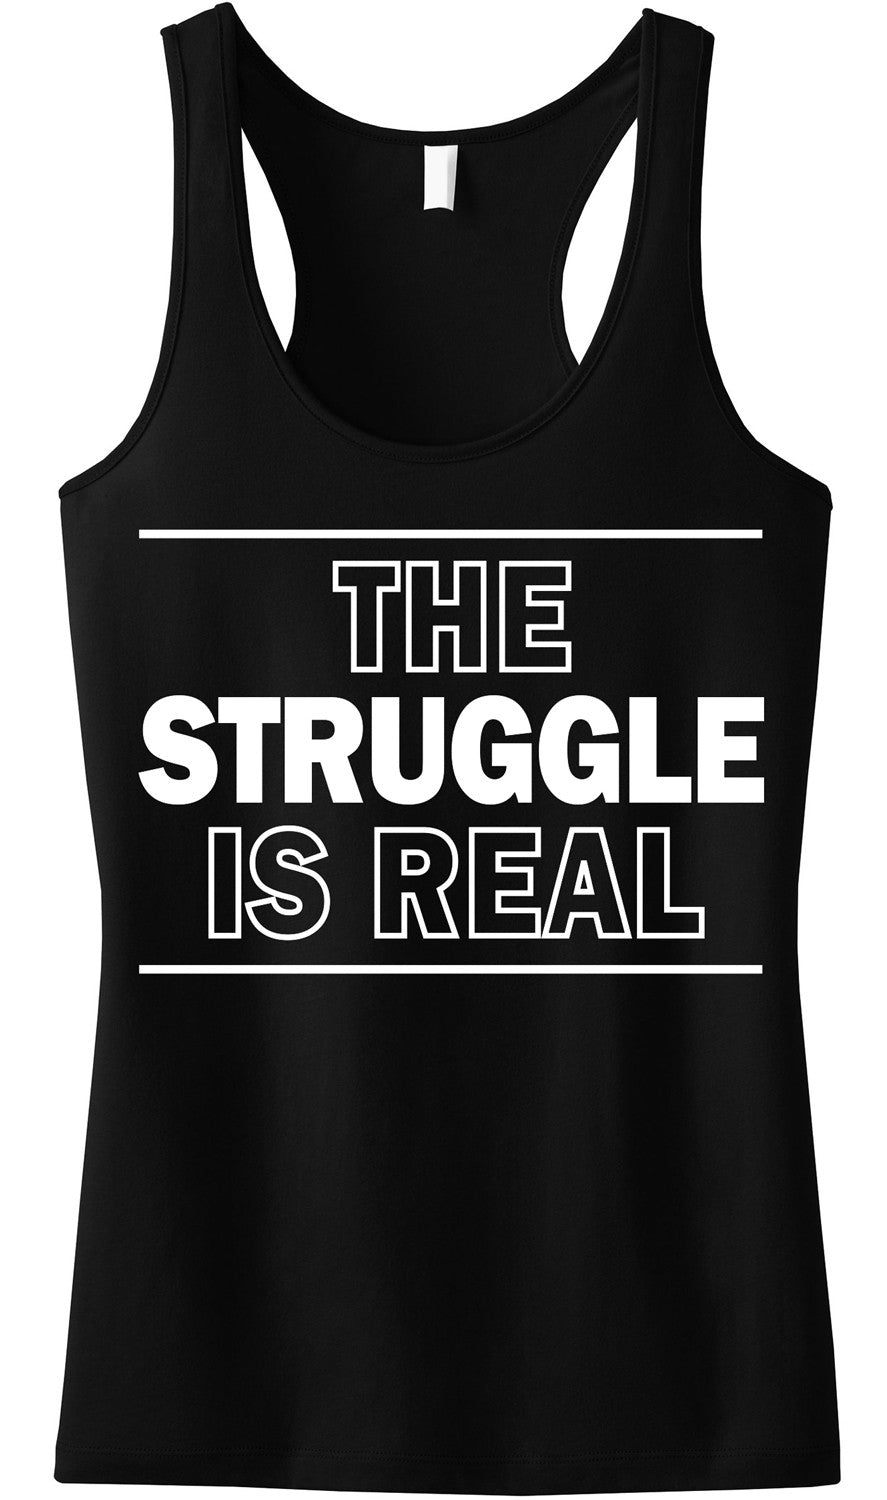 The Struggle is Real Tank Top Black Racerback